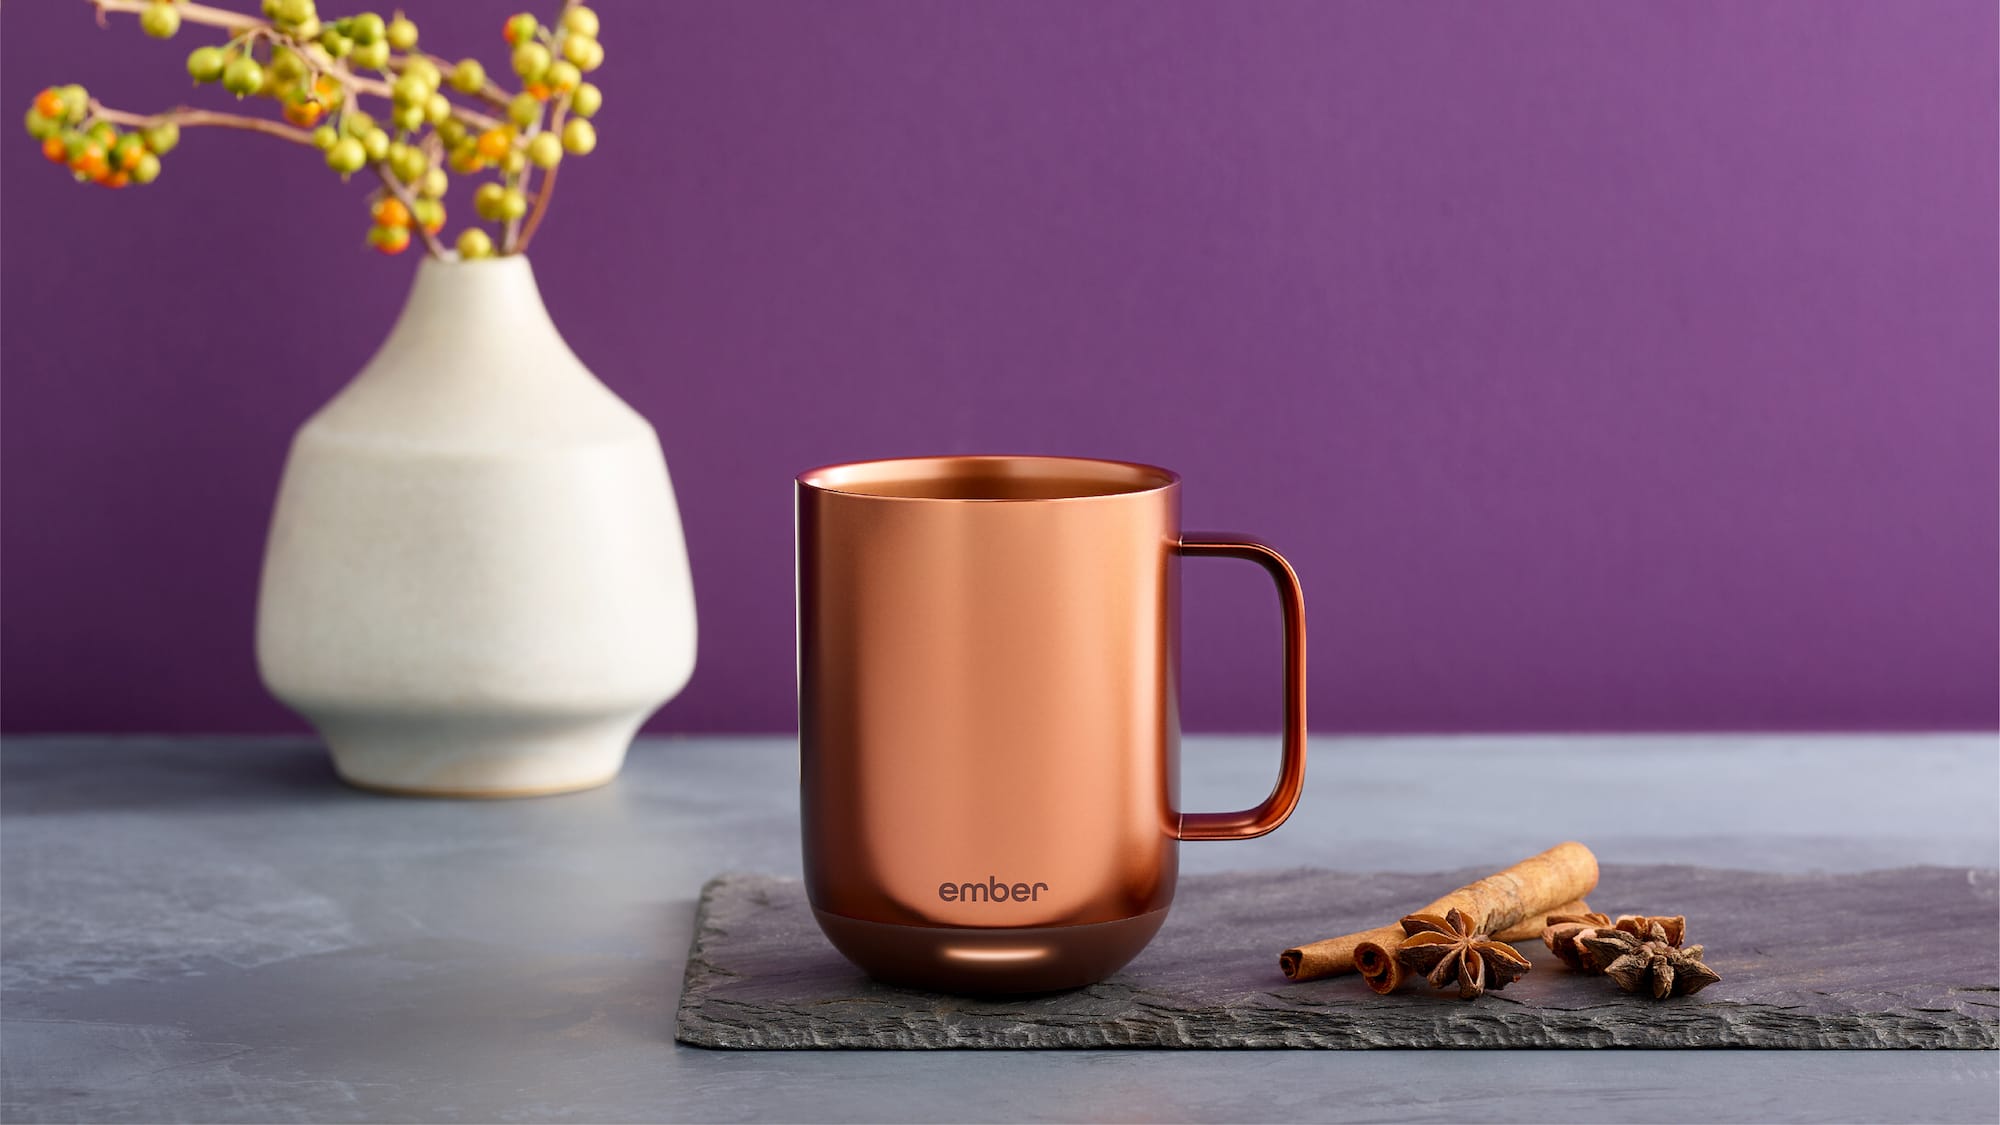 Ember Mug Top 10 Holiday Gift Ideas for Her